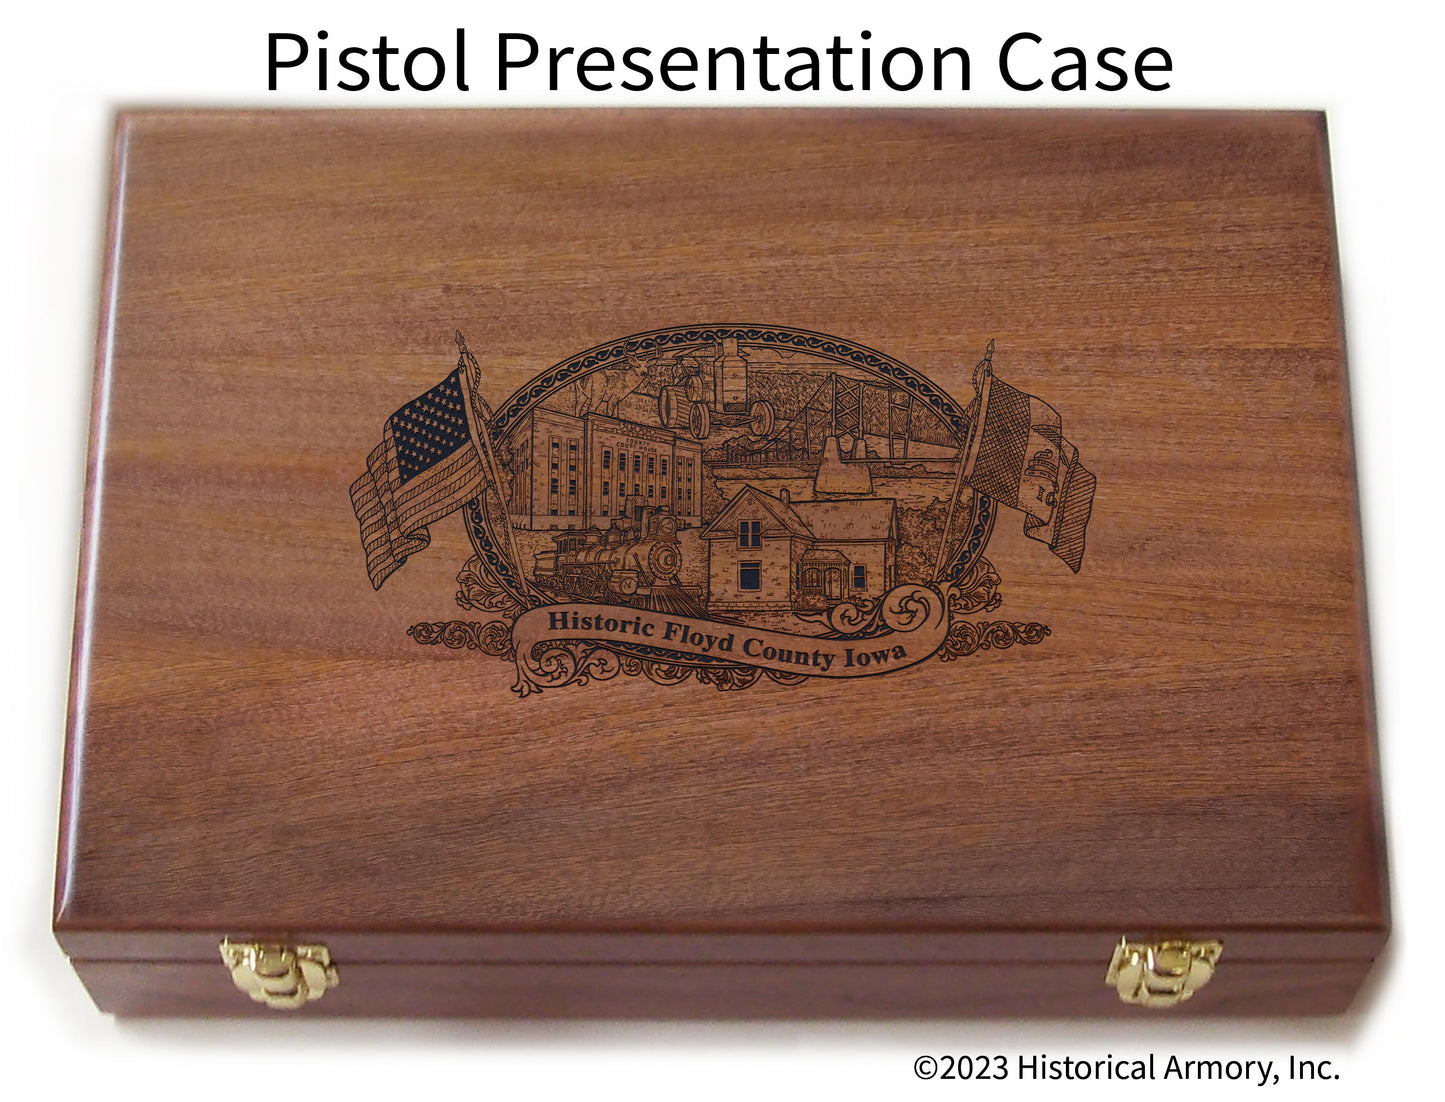 Floyd County Iowa Engraved .45 Auto Ruger 1911 Presentation Case